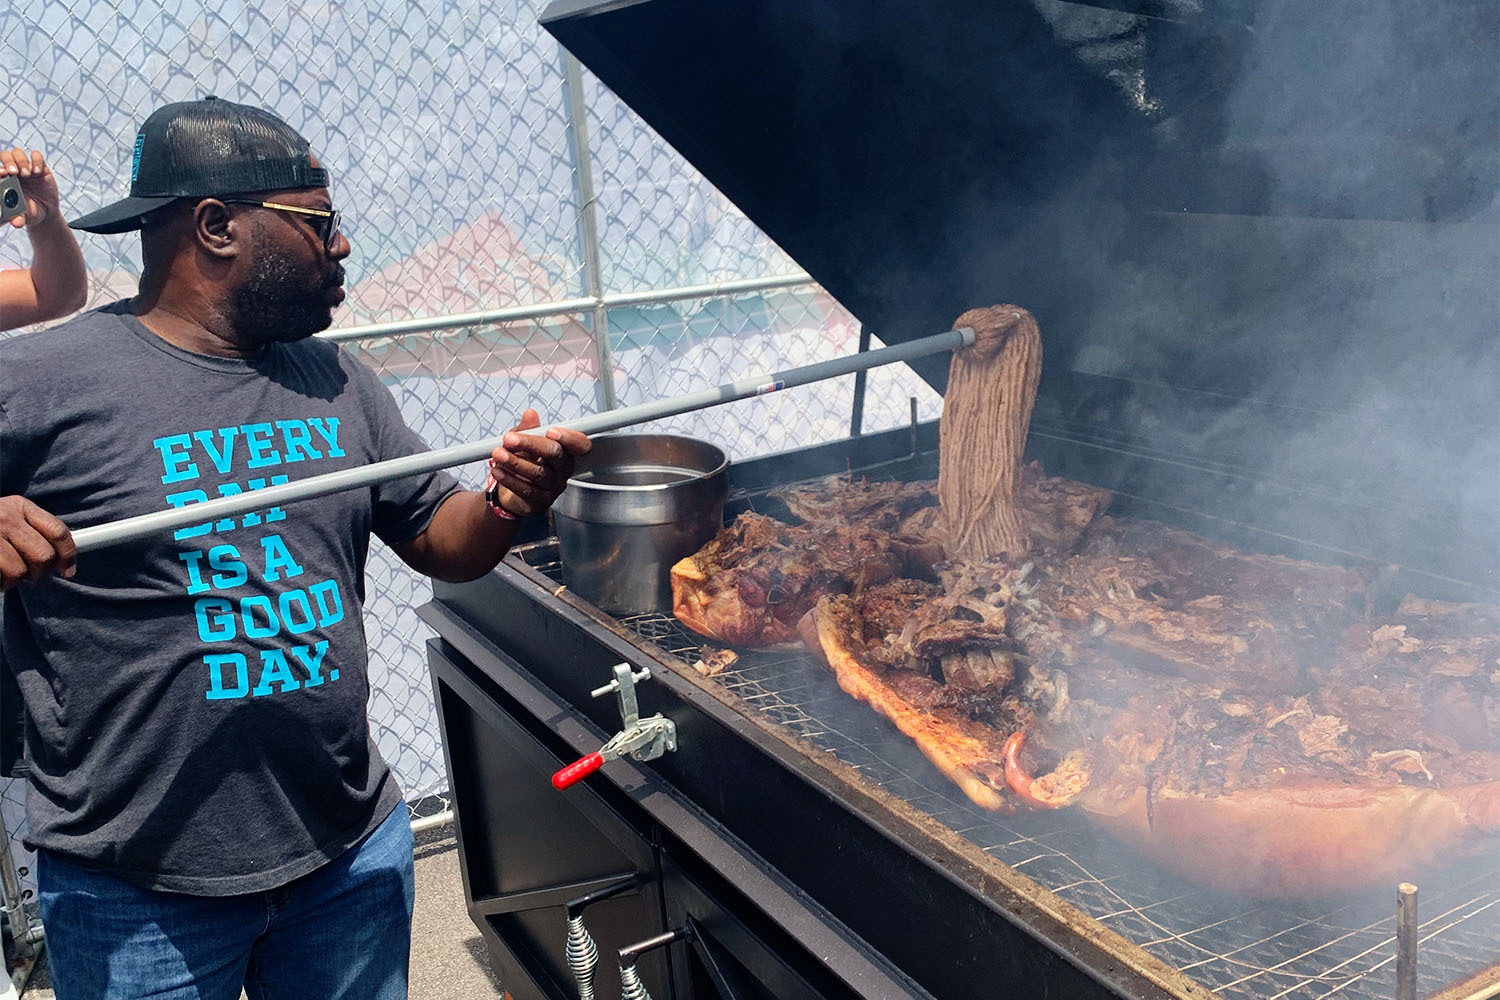 Chef Rodney Scott cooks barbecue on a grill